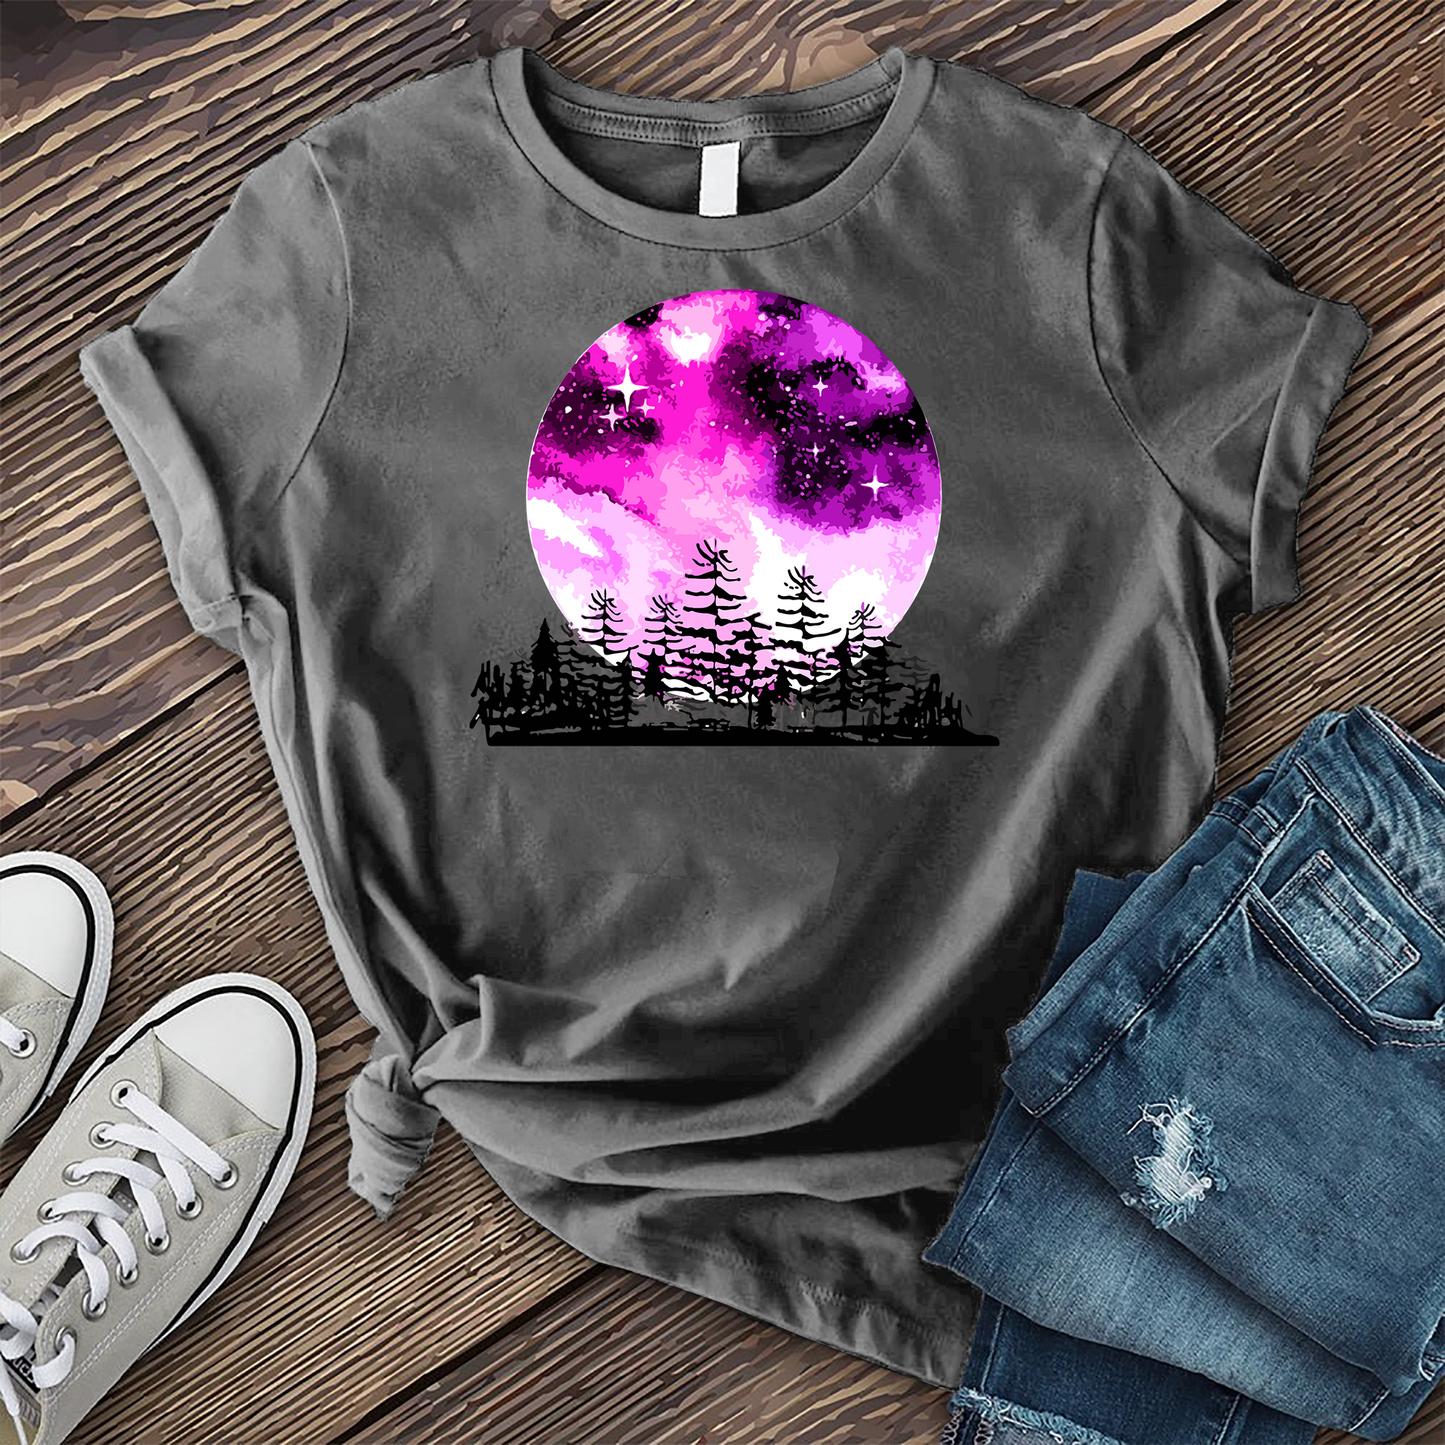 Psychedelic Night T-Shirt